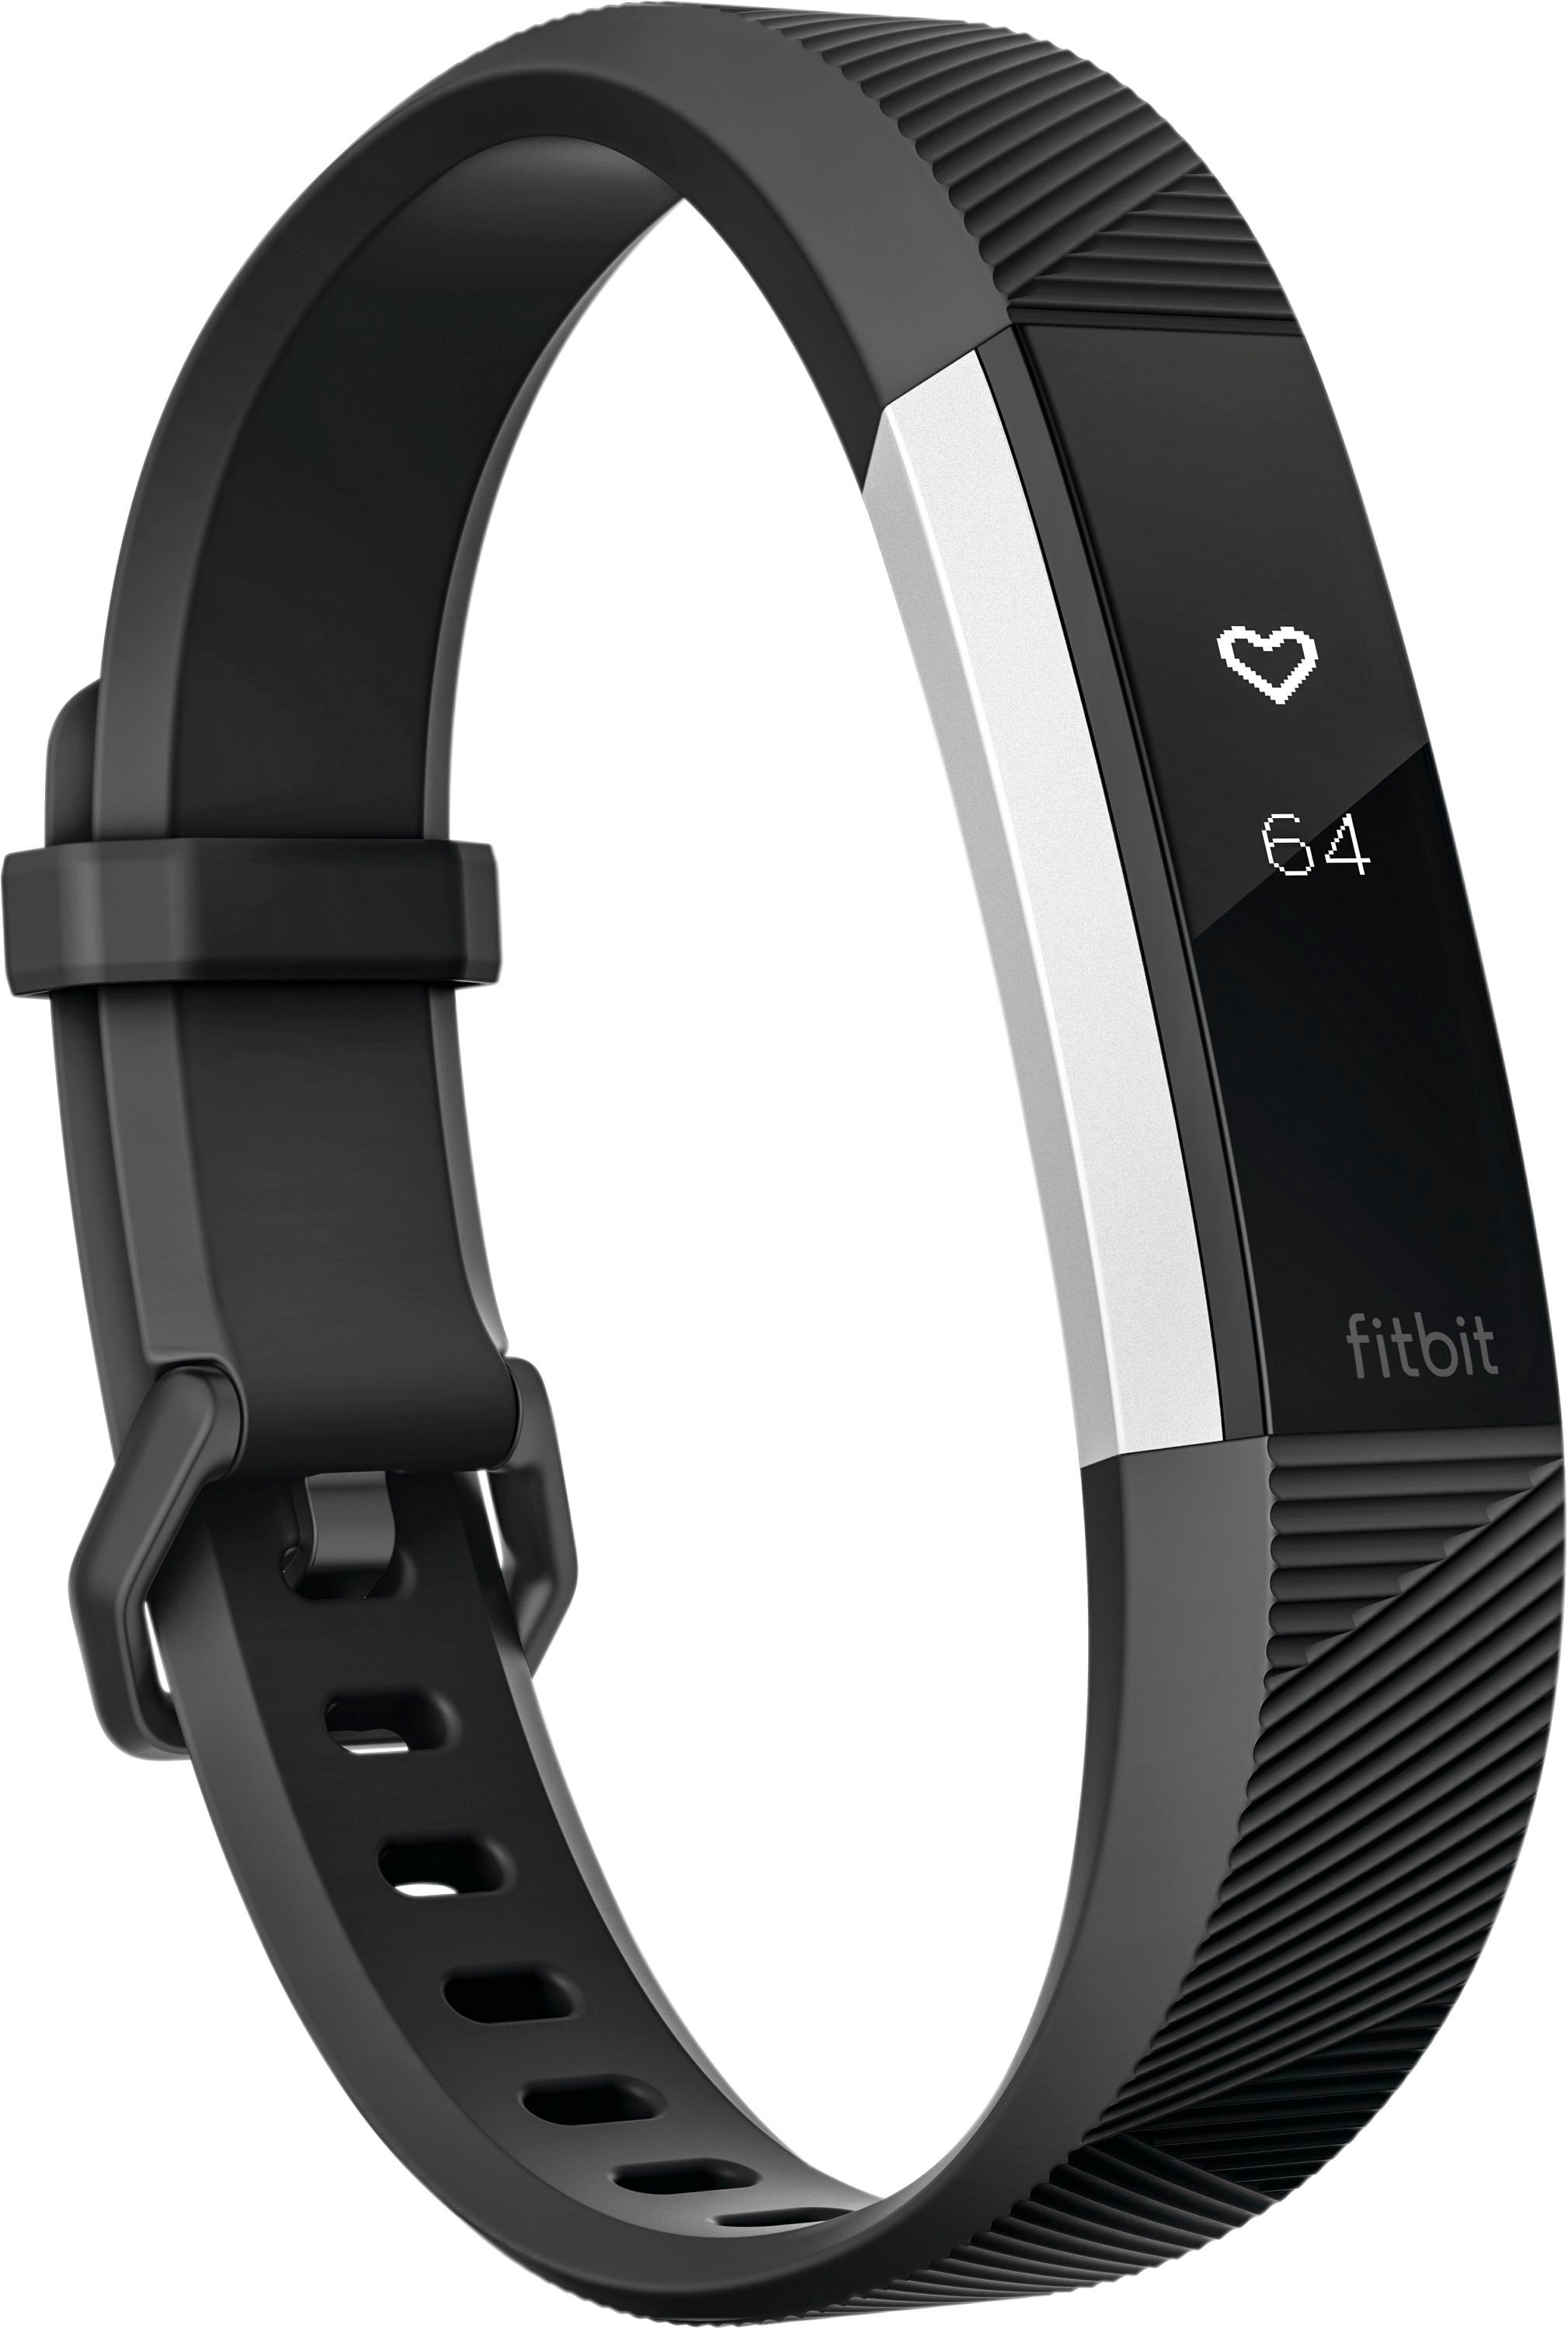 New Fitbit Alta HR Activity Tracker With Heart Rate Fitness Wristband 